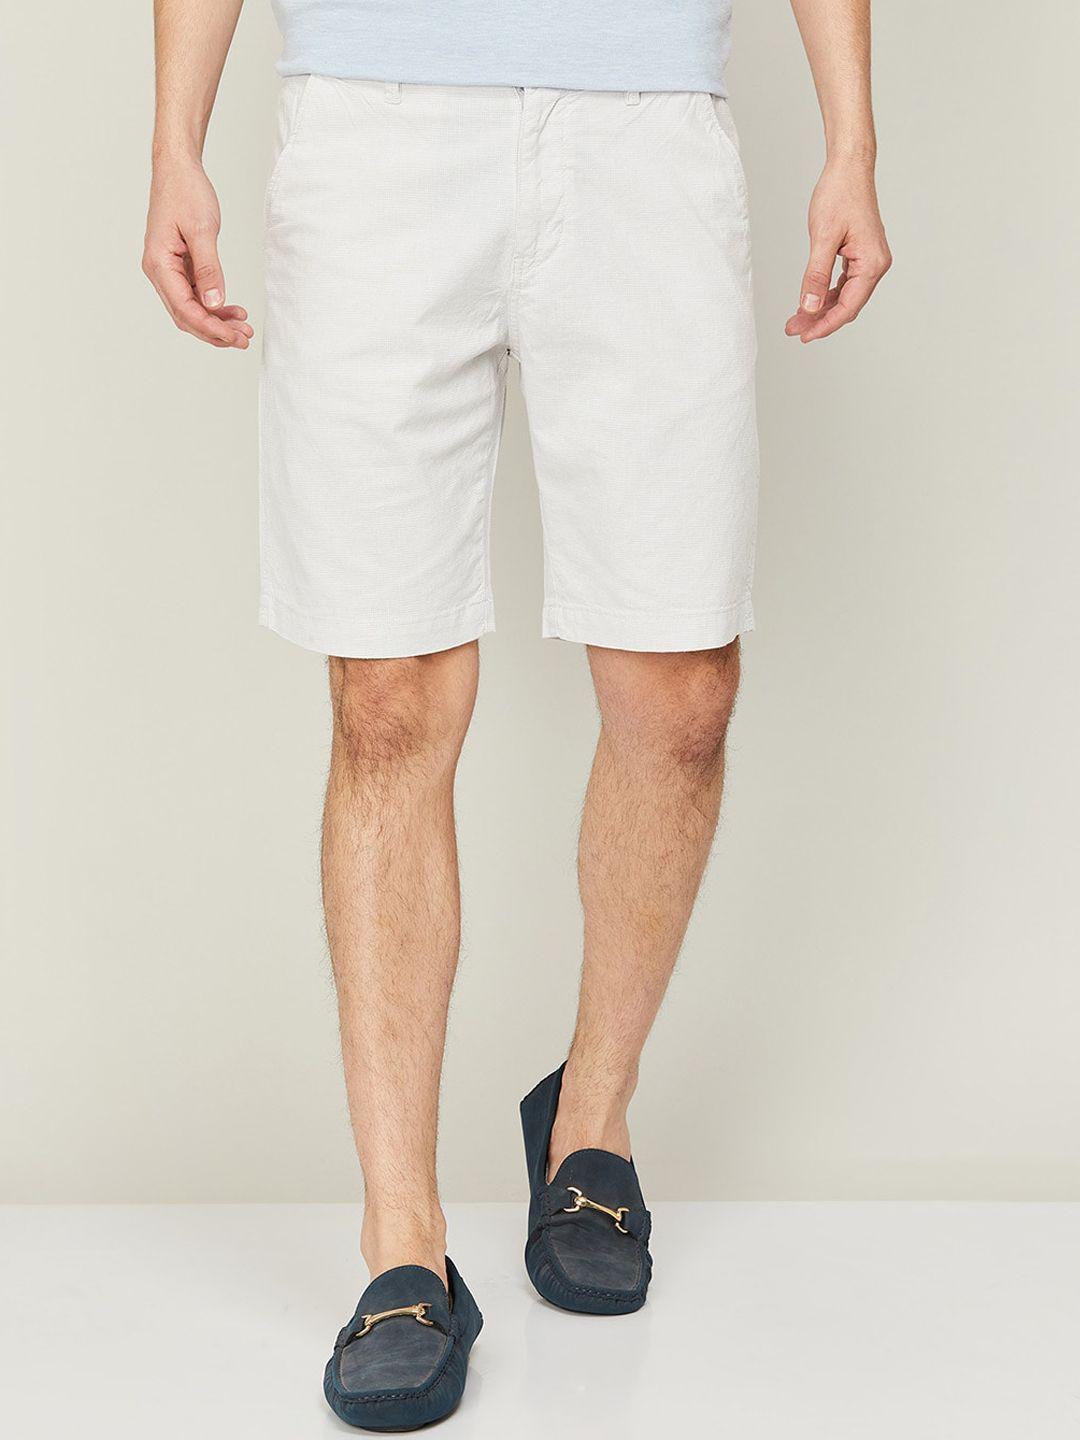 code-by-lifestyle-men-cotton-regular-fit-shorts